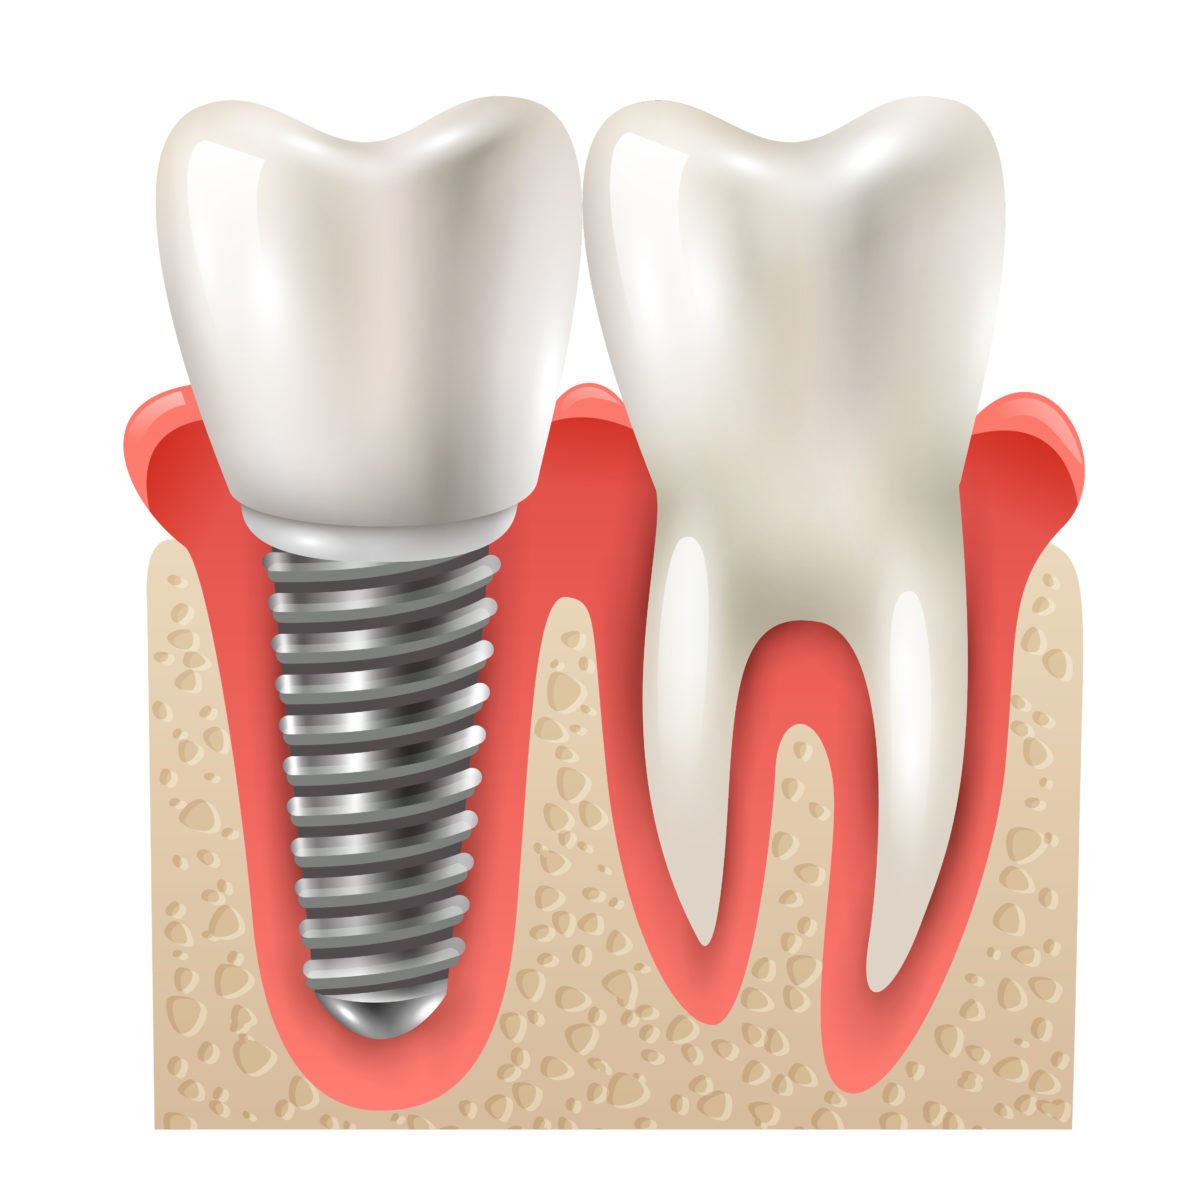 Are dental implants the future?